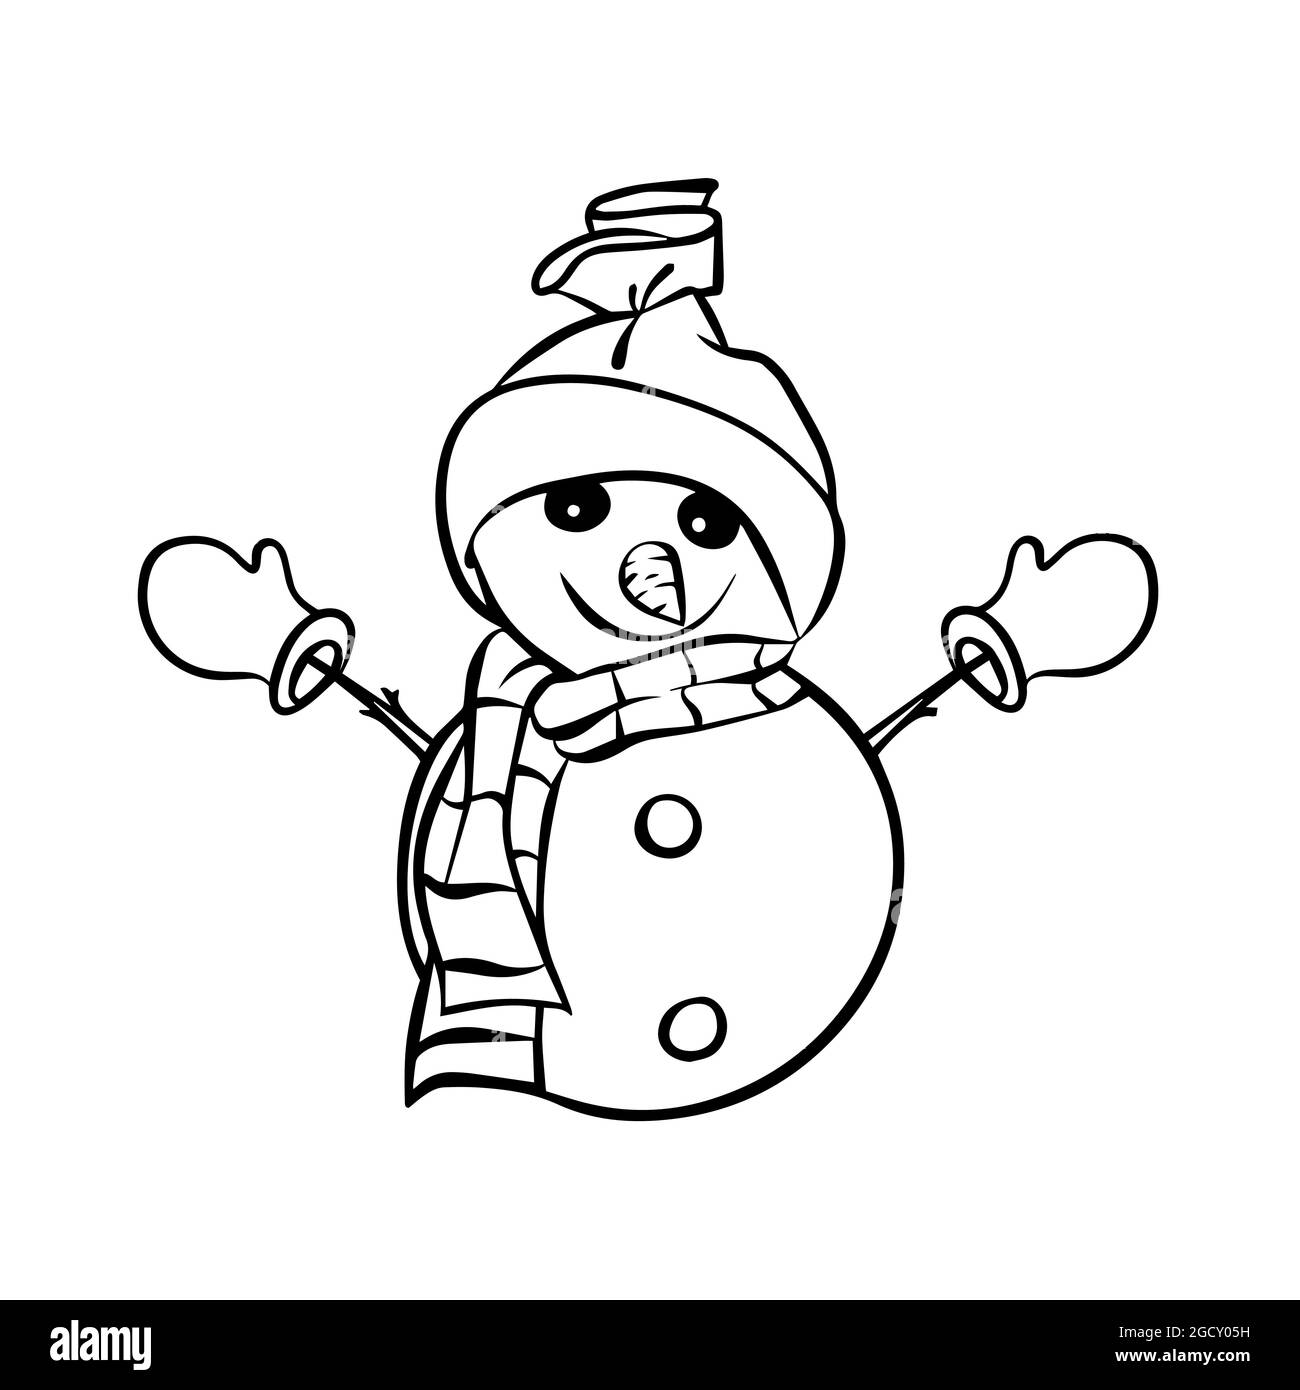 Cute snowman in a hat and scarf. Vector illustration in the doodle style. Suitable for anti-stress and children's coloring books Stock Vector